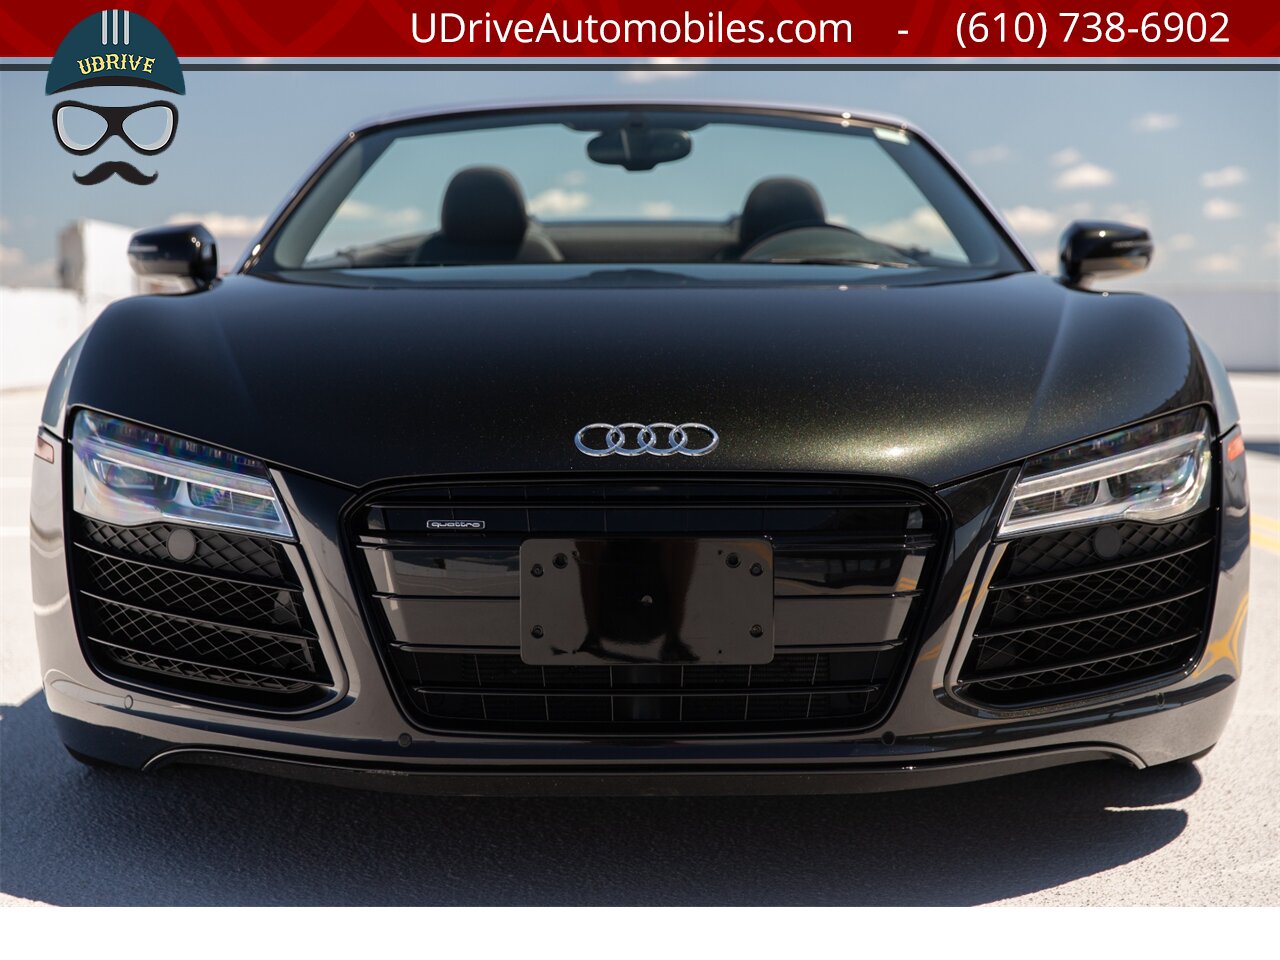 2014 Audi R8 5.2 V10 Quattro Spyder 6 Speed Manual 2k Miles  Extremely RARE 1 of 1 Color Combo - Photo 12 - West Chester, PA 19382